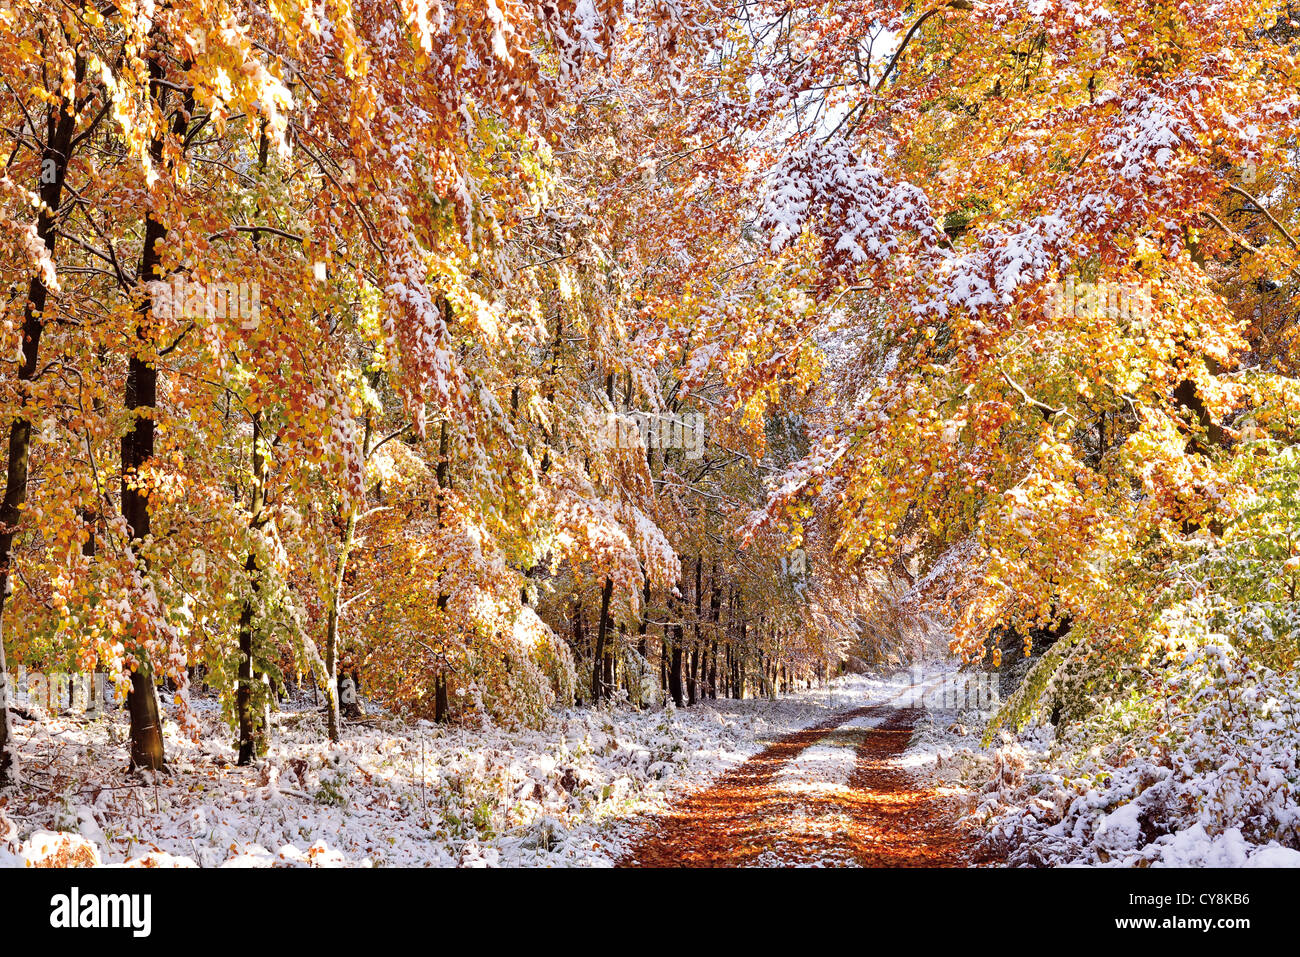 Germany, Odenwald: Autumn forest with first snow Stock Photo